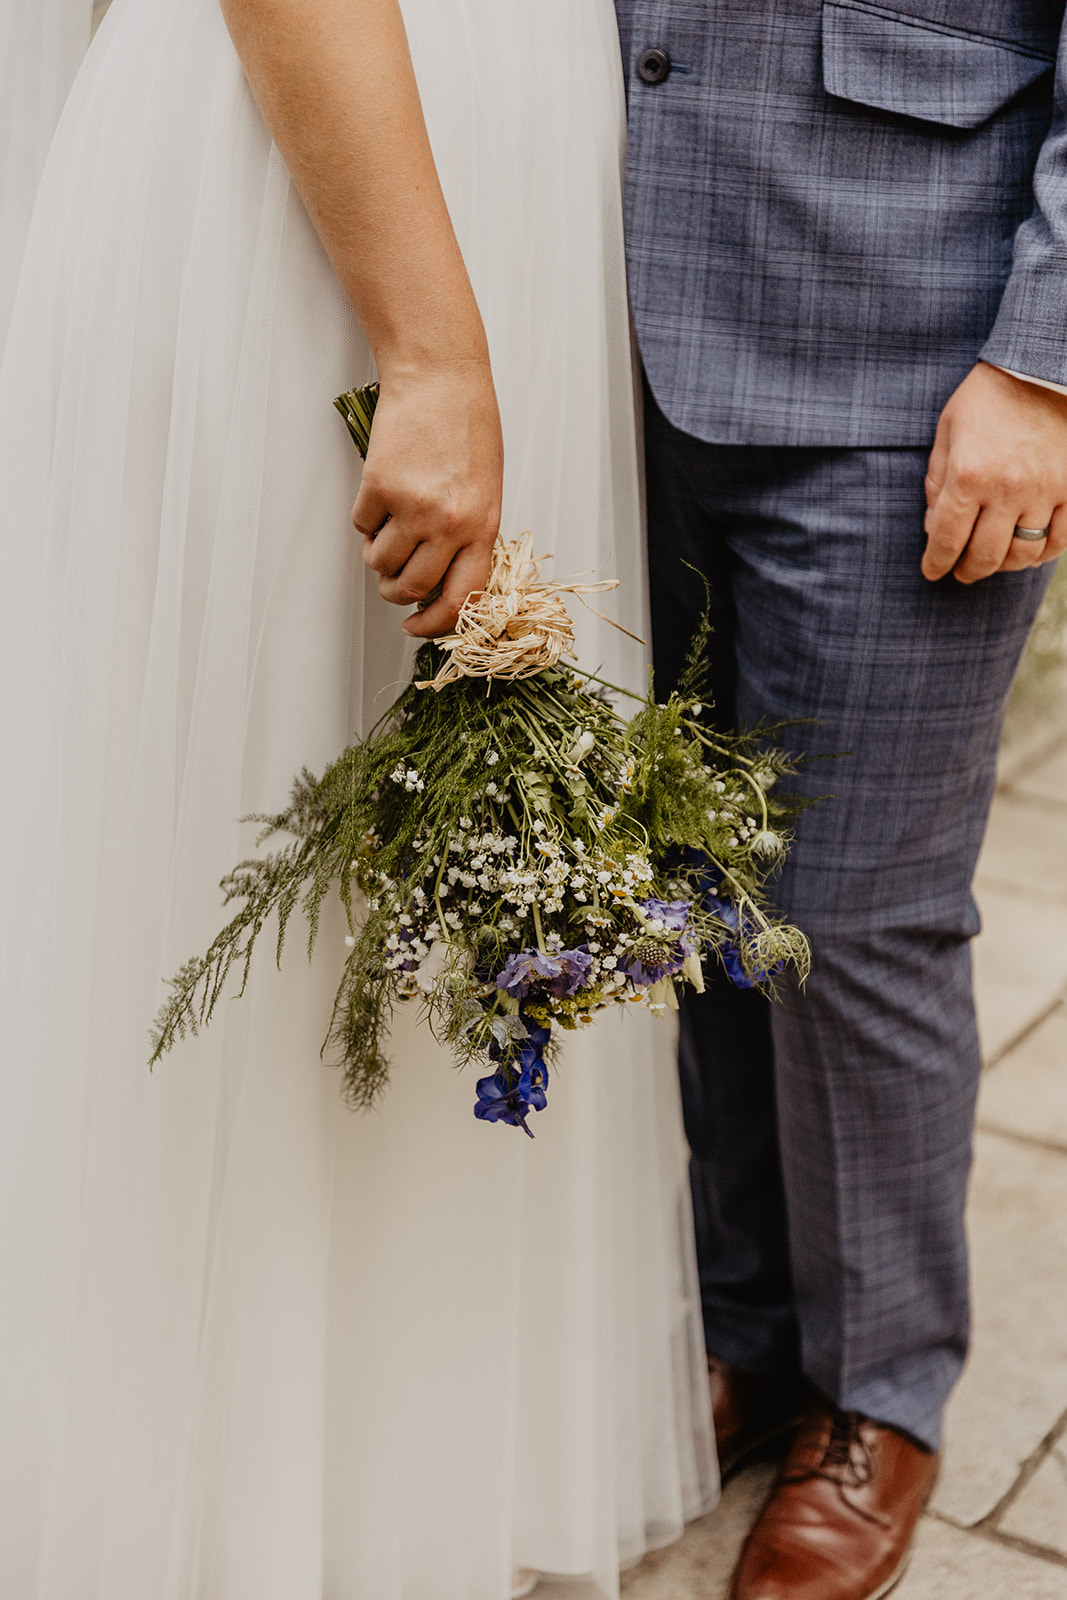 Bride and groom holding bouquet at Field Place Wedding Worthing, Sussex. By OliveJoy Photography.